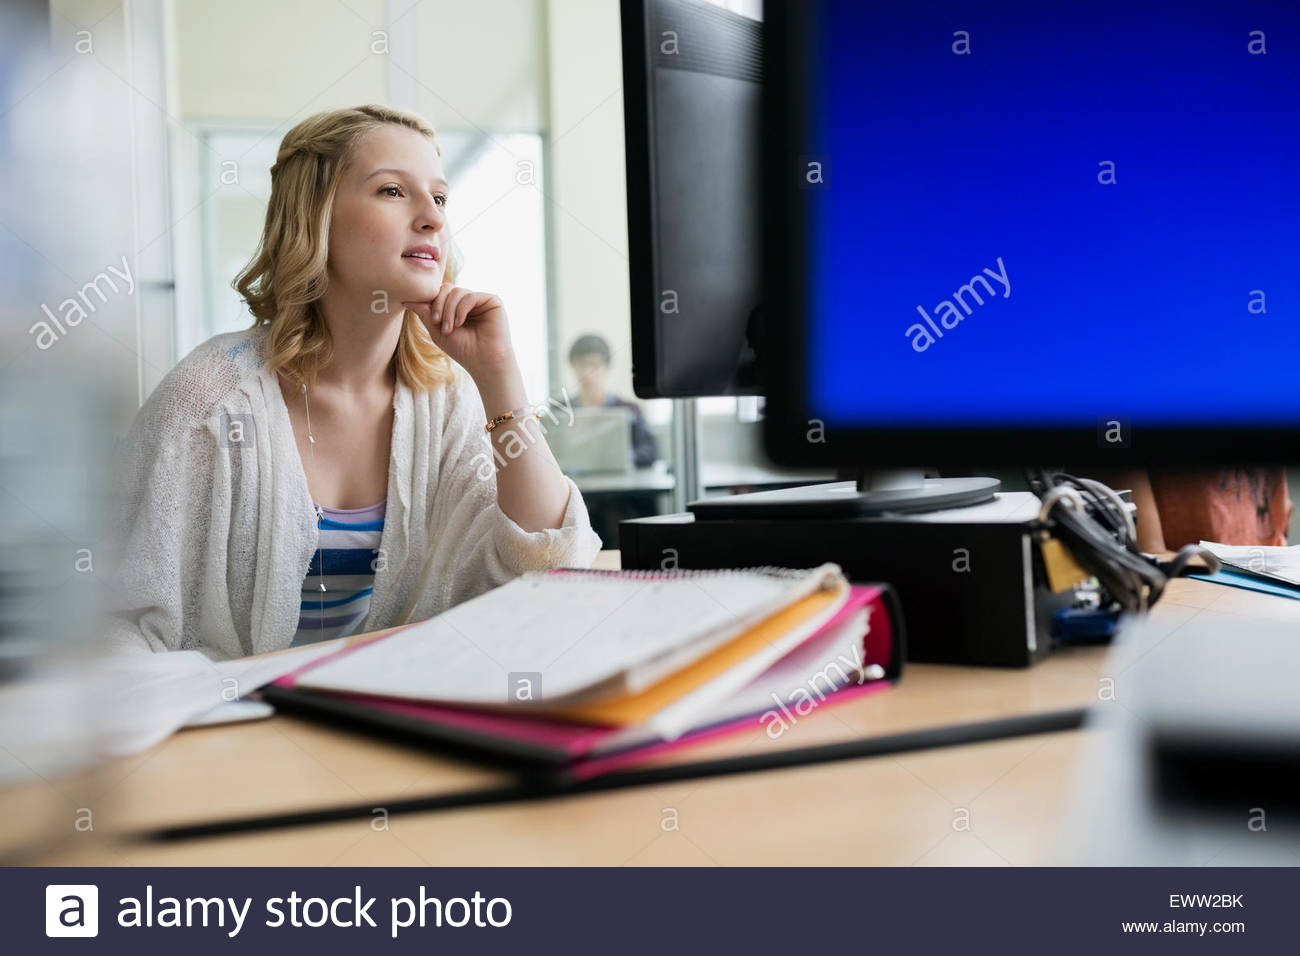 College student studying at computer in classroom Stock Photo